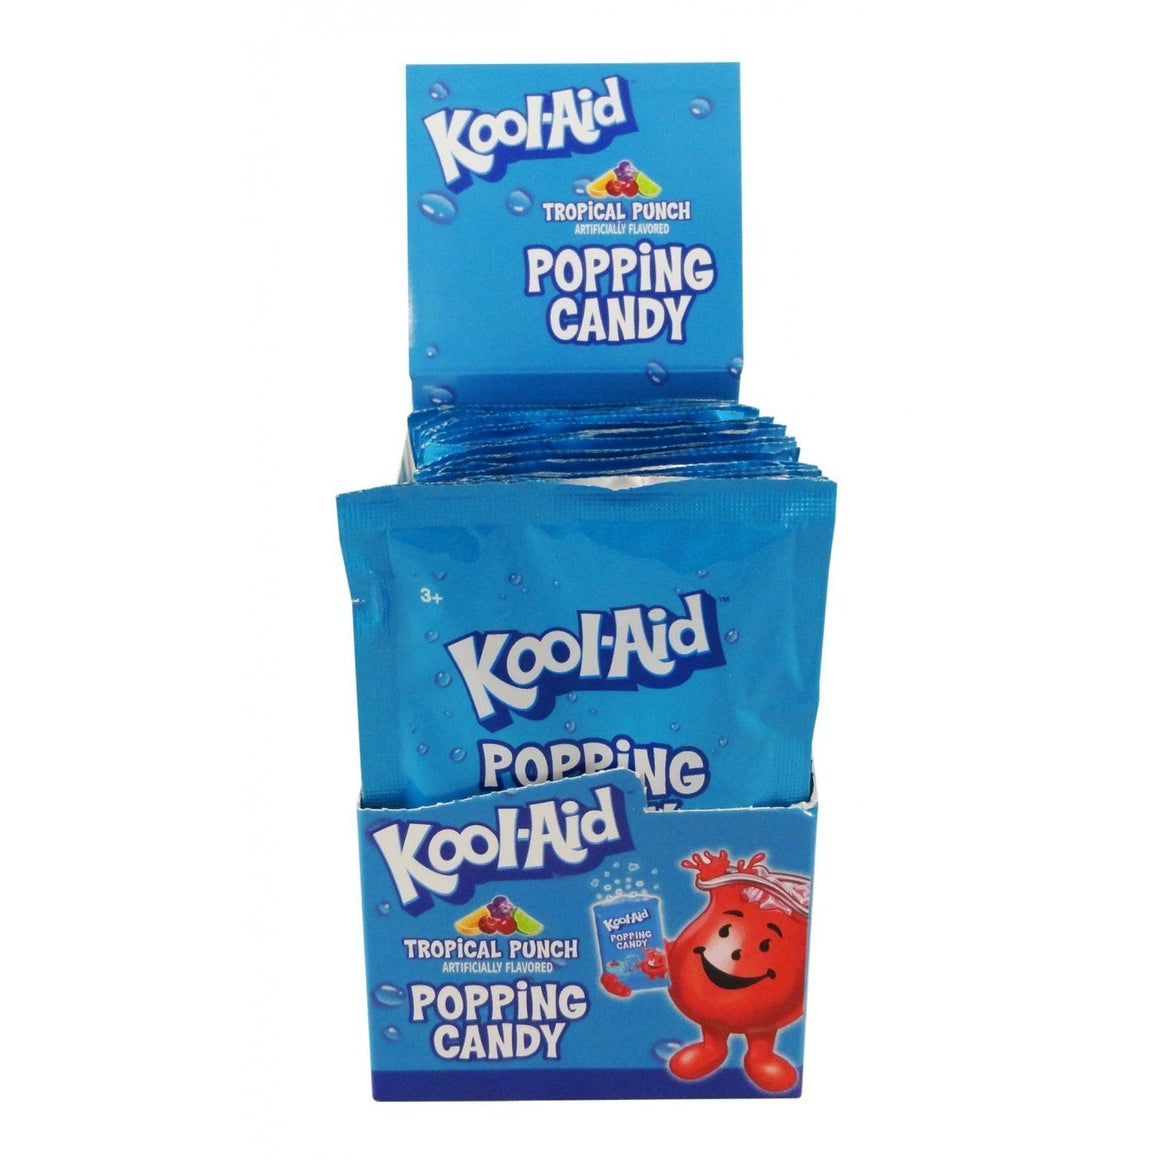 All City Candy Kool-Aid Popping Candy Tropical Punch 0.33 oz. Pouch 1 Pouch Novelty Hilco For fresh candy and great service, visit www.allcitycandy.com